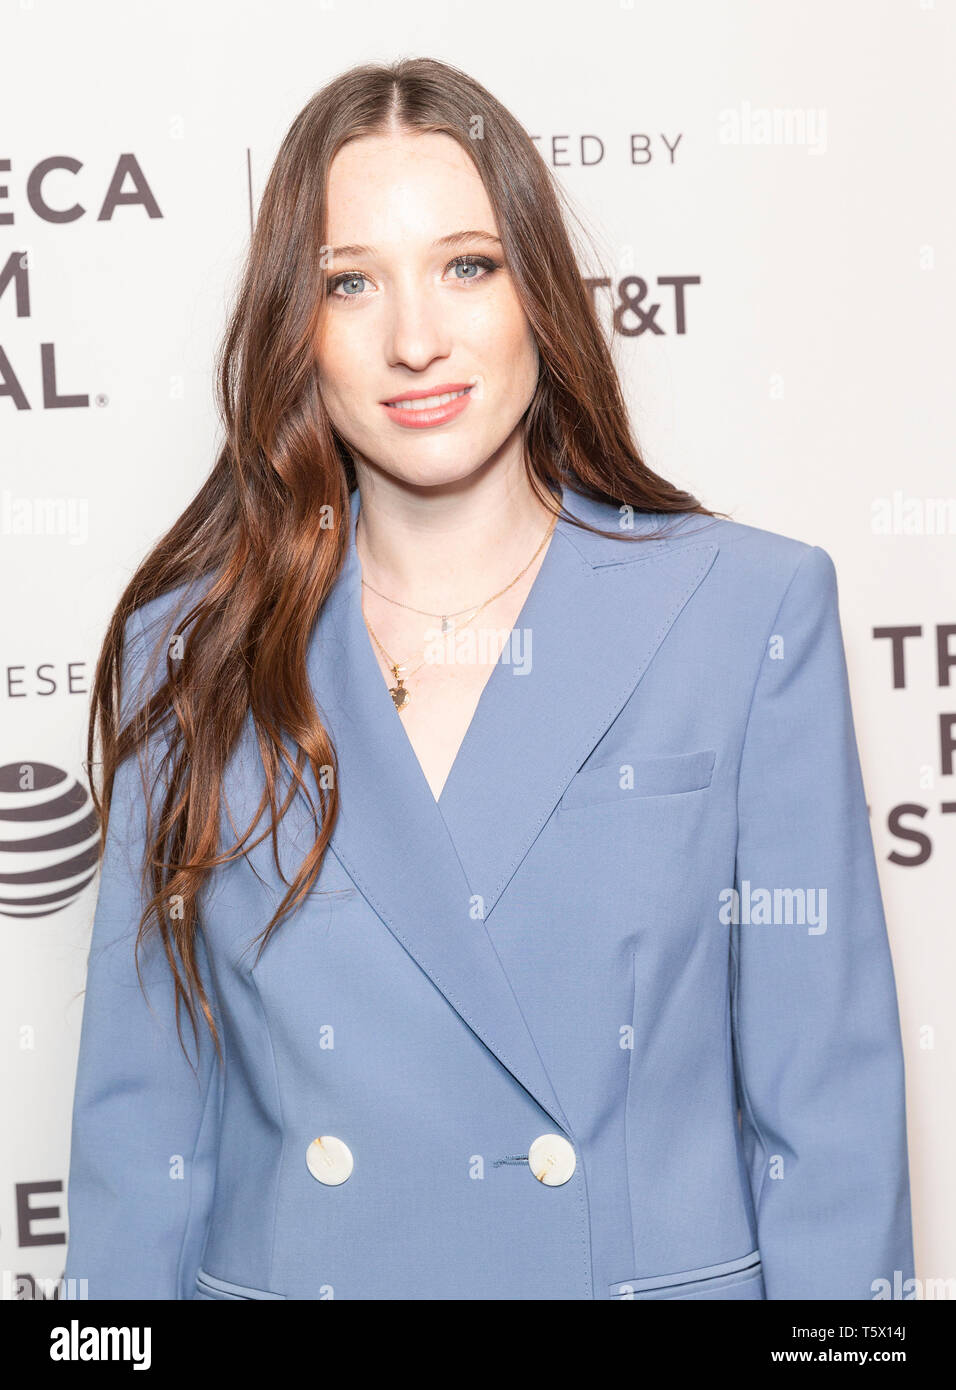 New York, United States. 26th Apr, 2019. Sophie Lowe wearing dress by Camilla Mack attends the Blow The Man Down screening at Tribeca Film Festival at SVA Theatre Credit: Lev Radin/Pacific Press/Alamy Live News Stock Photo